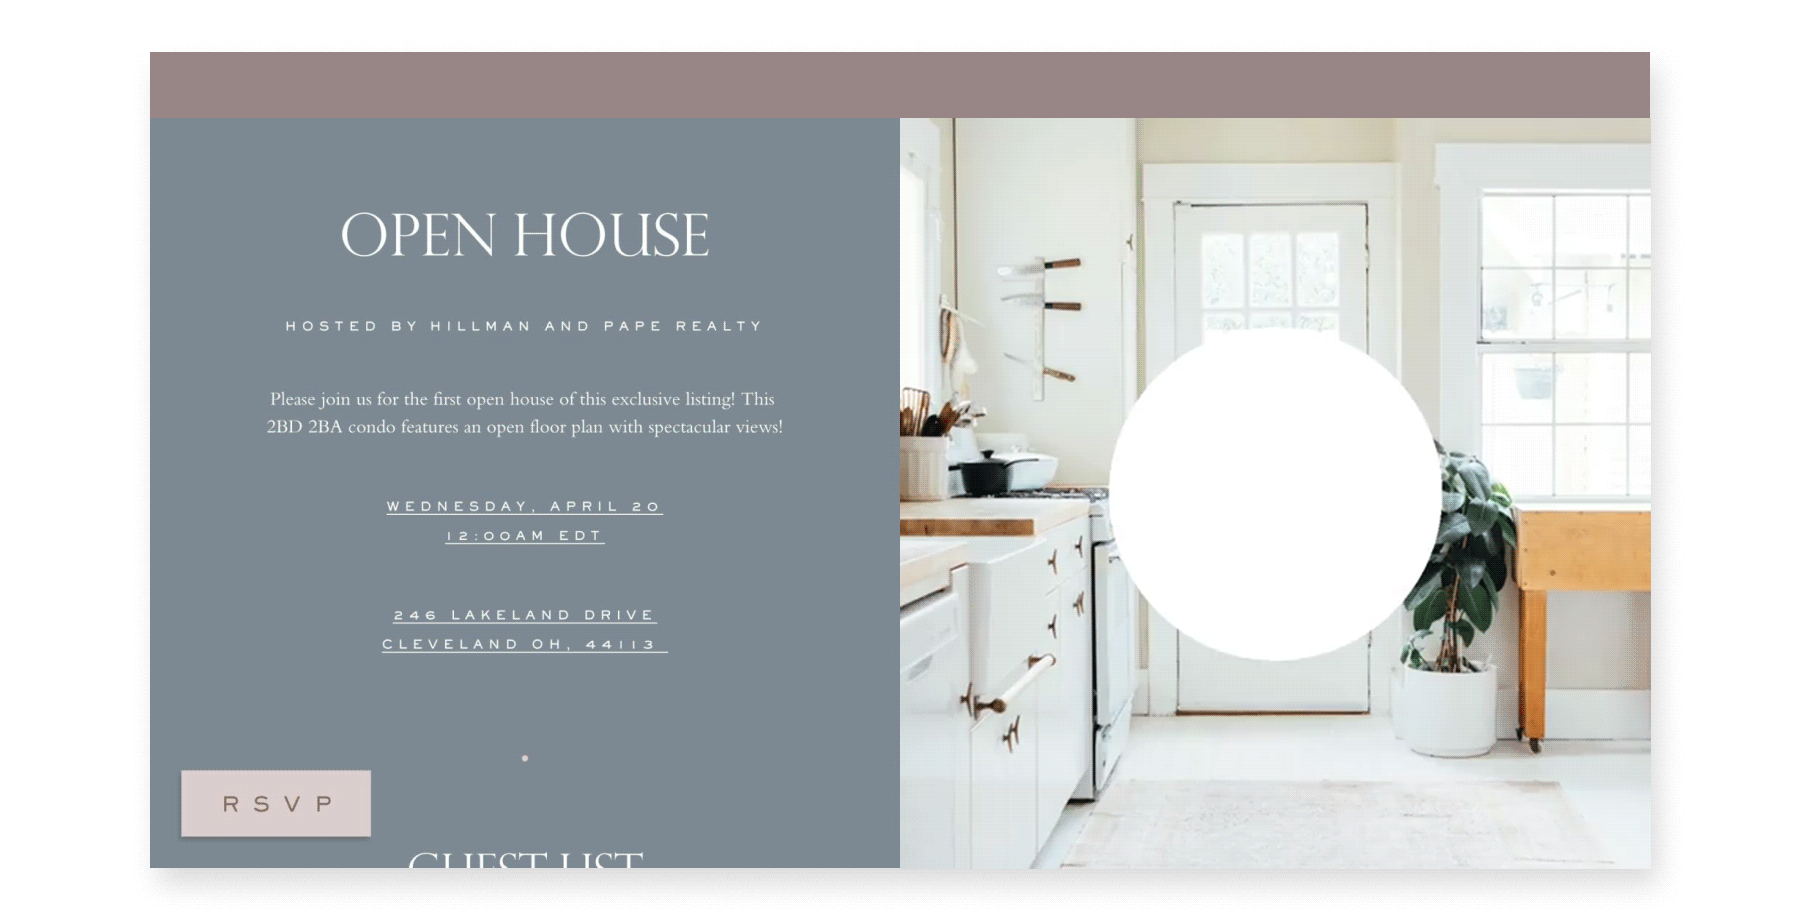 An online invitation with gray-blue on the left, and on the right, a white farmhouse-style kitchen with the words “OPEN HOUSE” in a white circle.